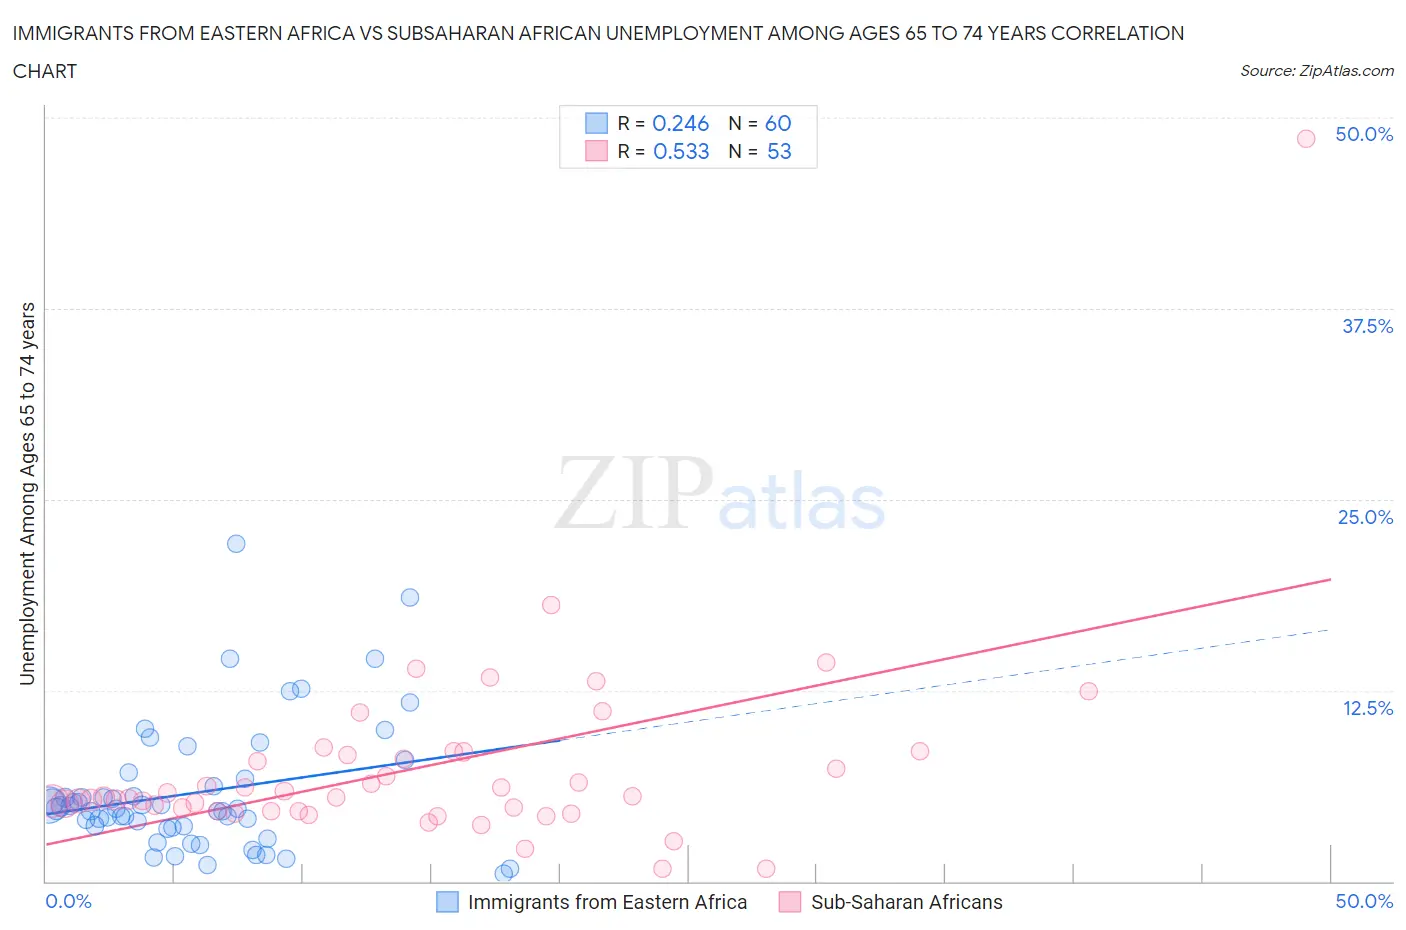 Immigrants from Eastern Africa vs Subsaharan African Unemployment Among Ages 65 to 74 years